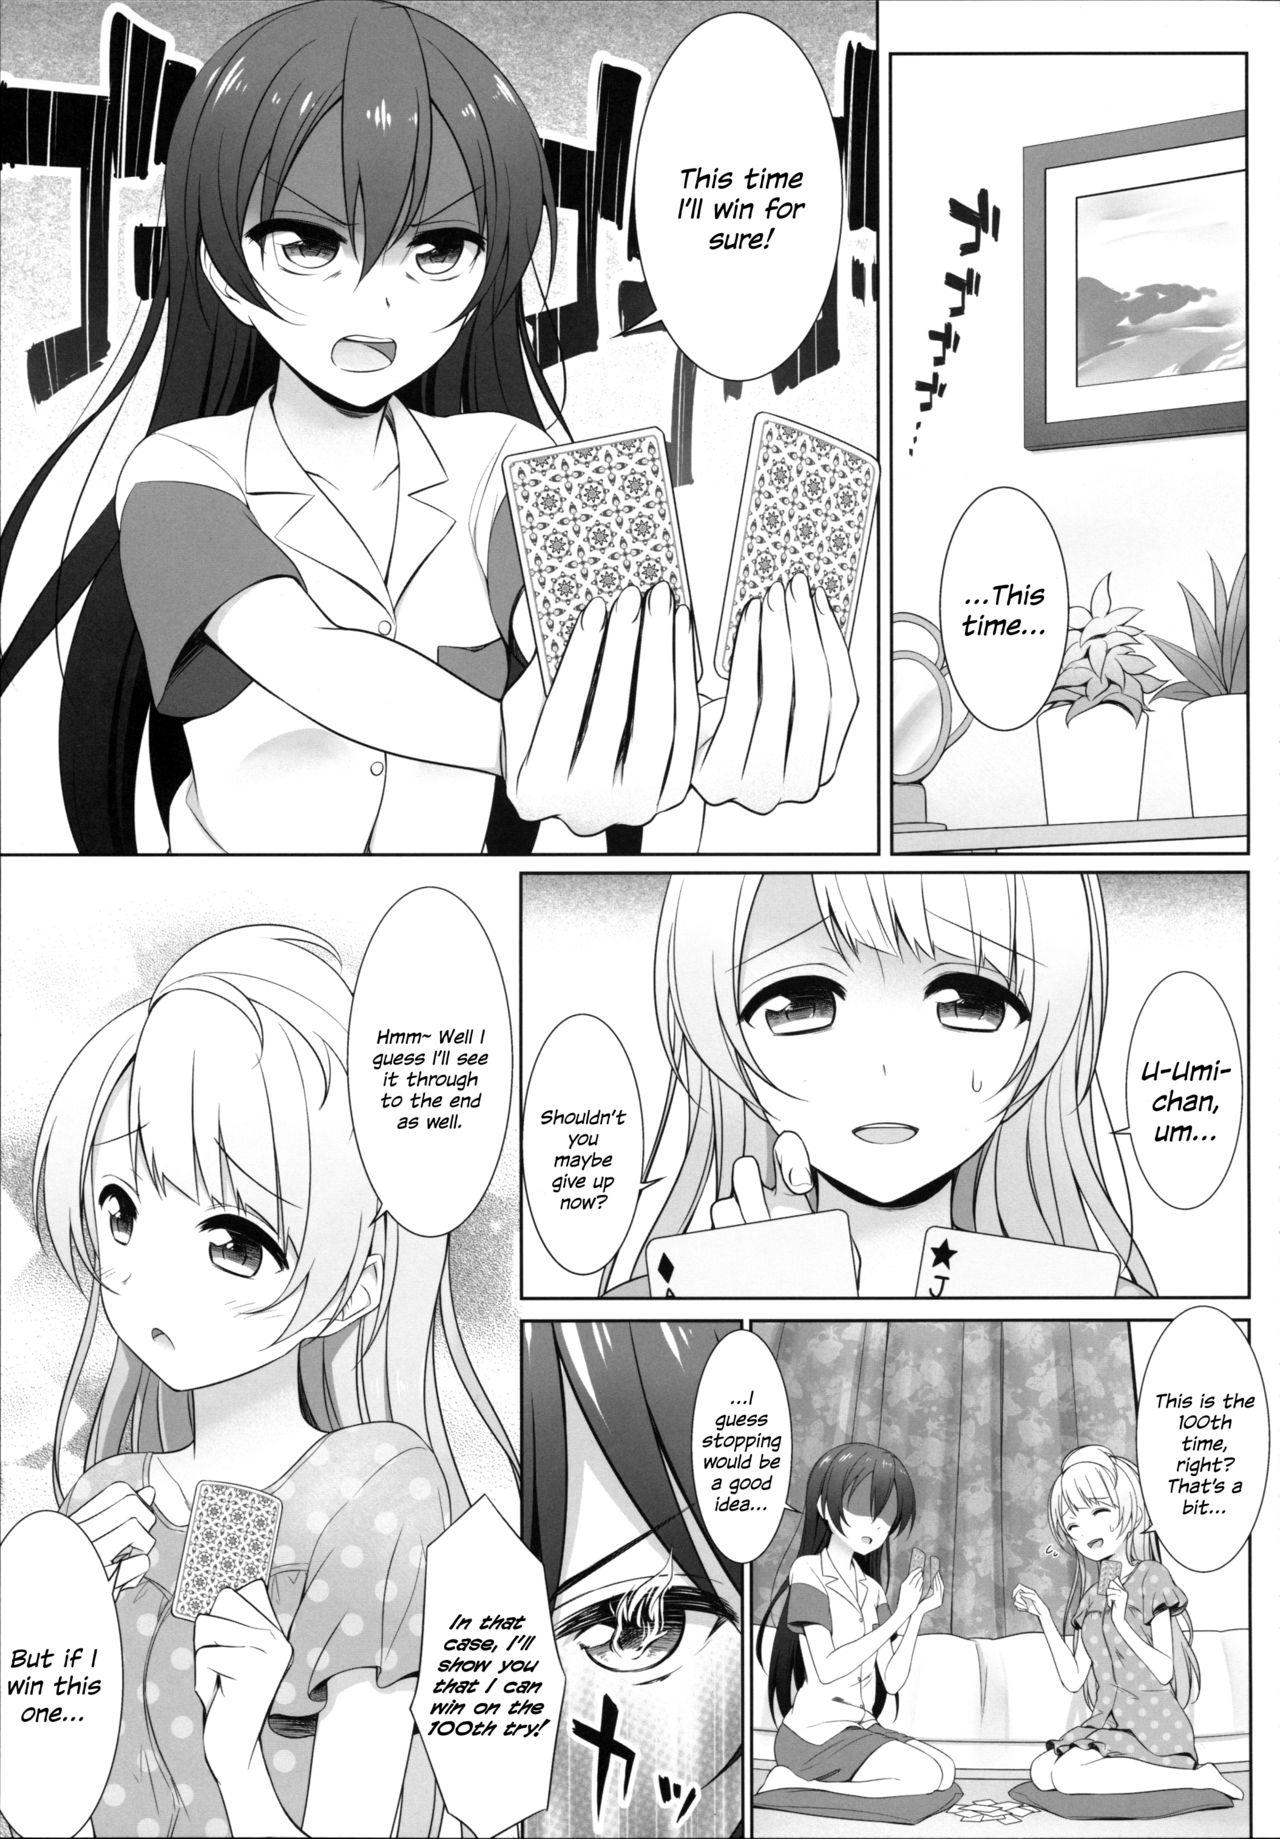 Analfucking Batsu Game wa Solo Sex | The Forfeit is a Solo Performance - Love live Fit - Page 5